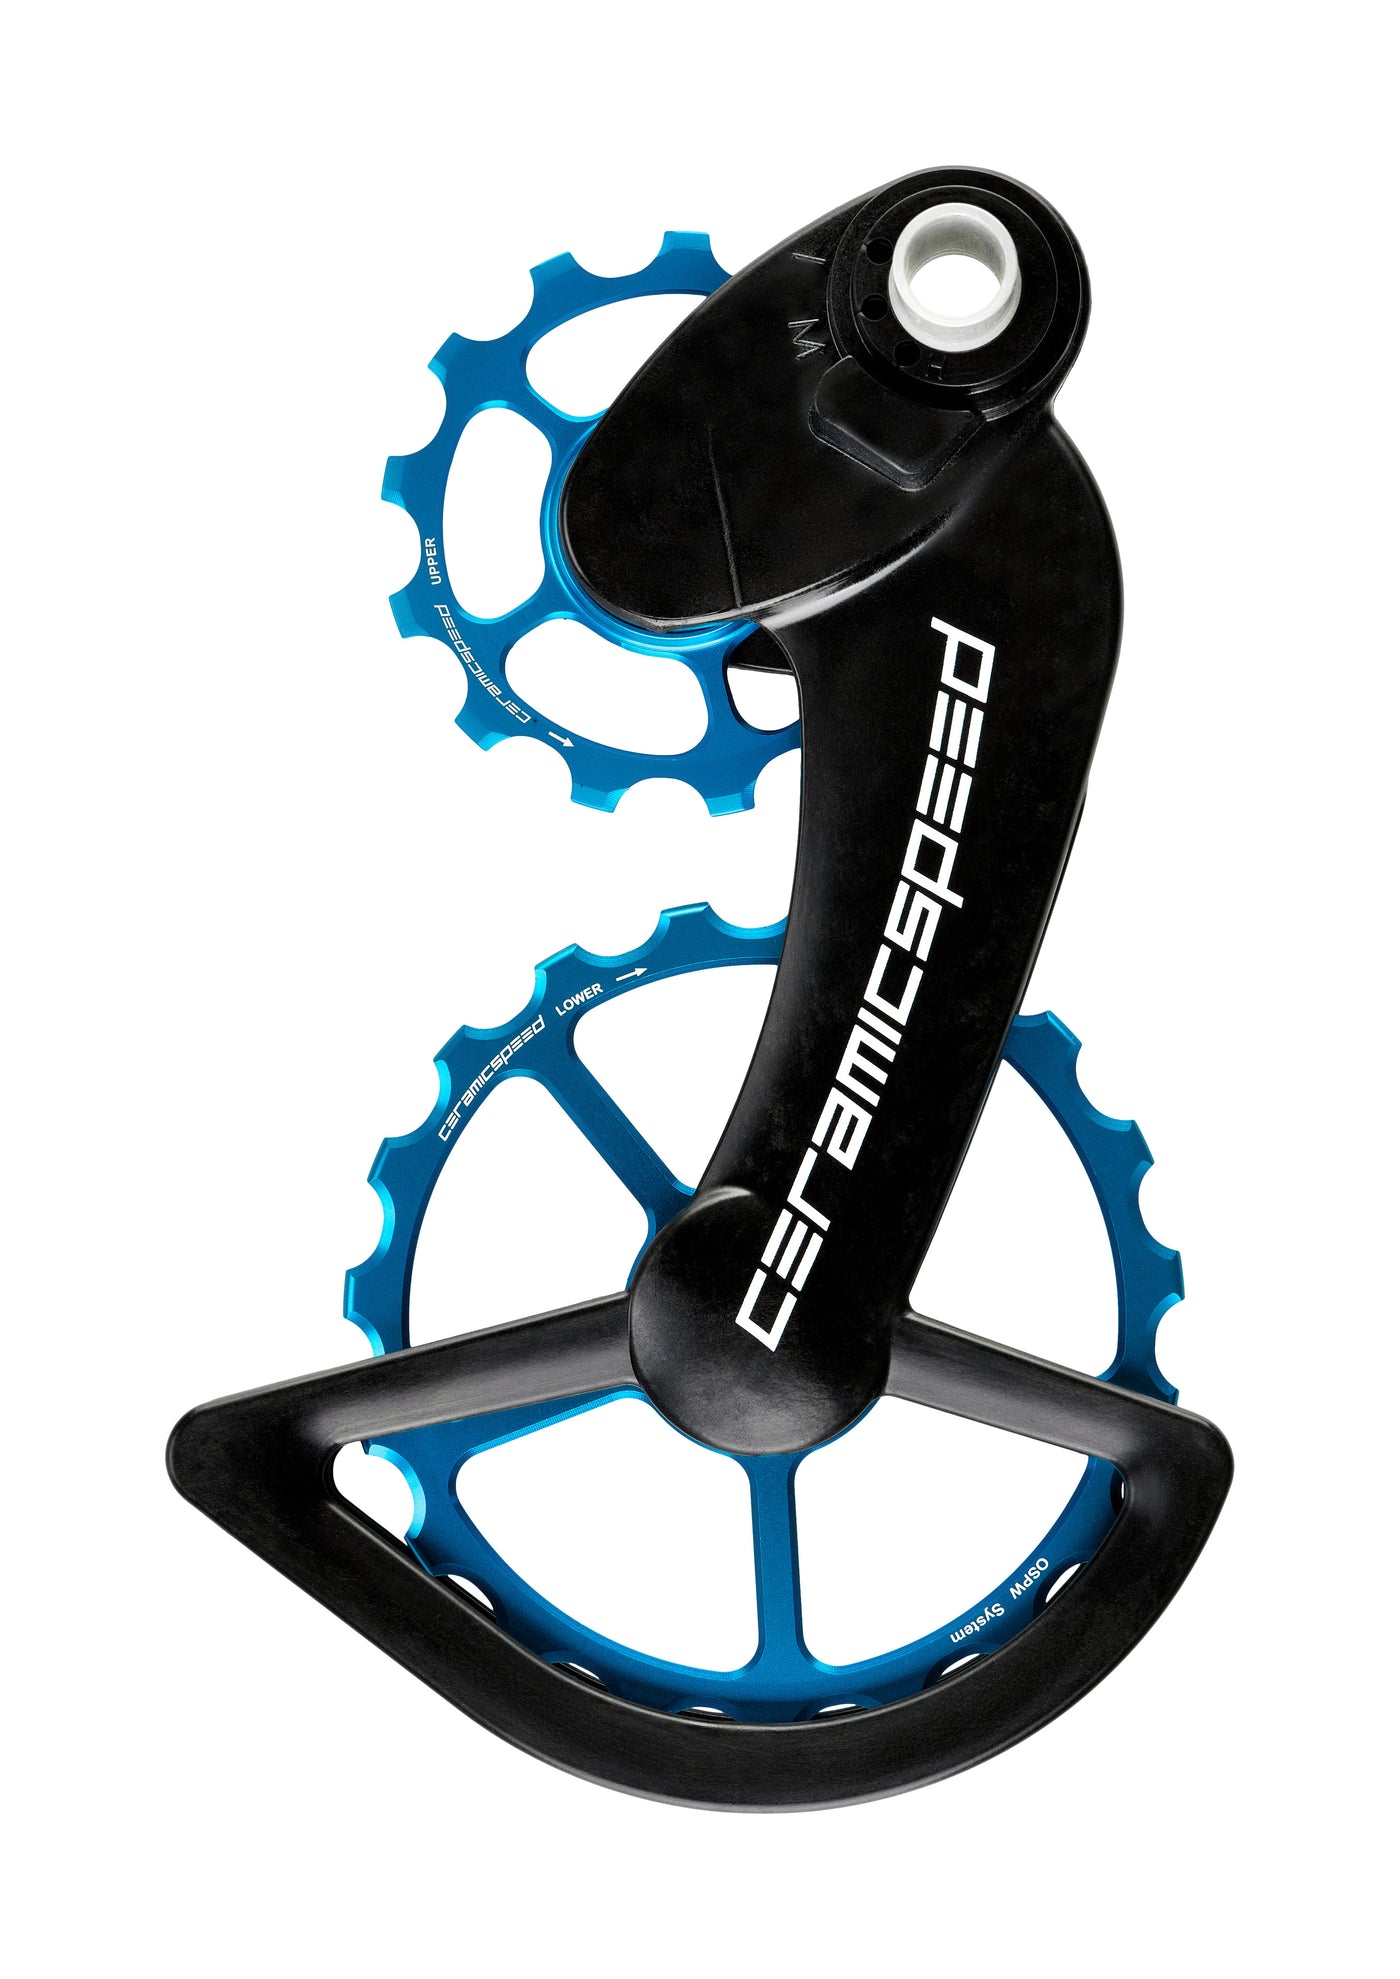 CeramicSpeed OSPW System Campagnolo EPS 12 speed